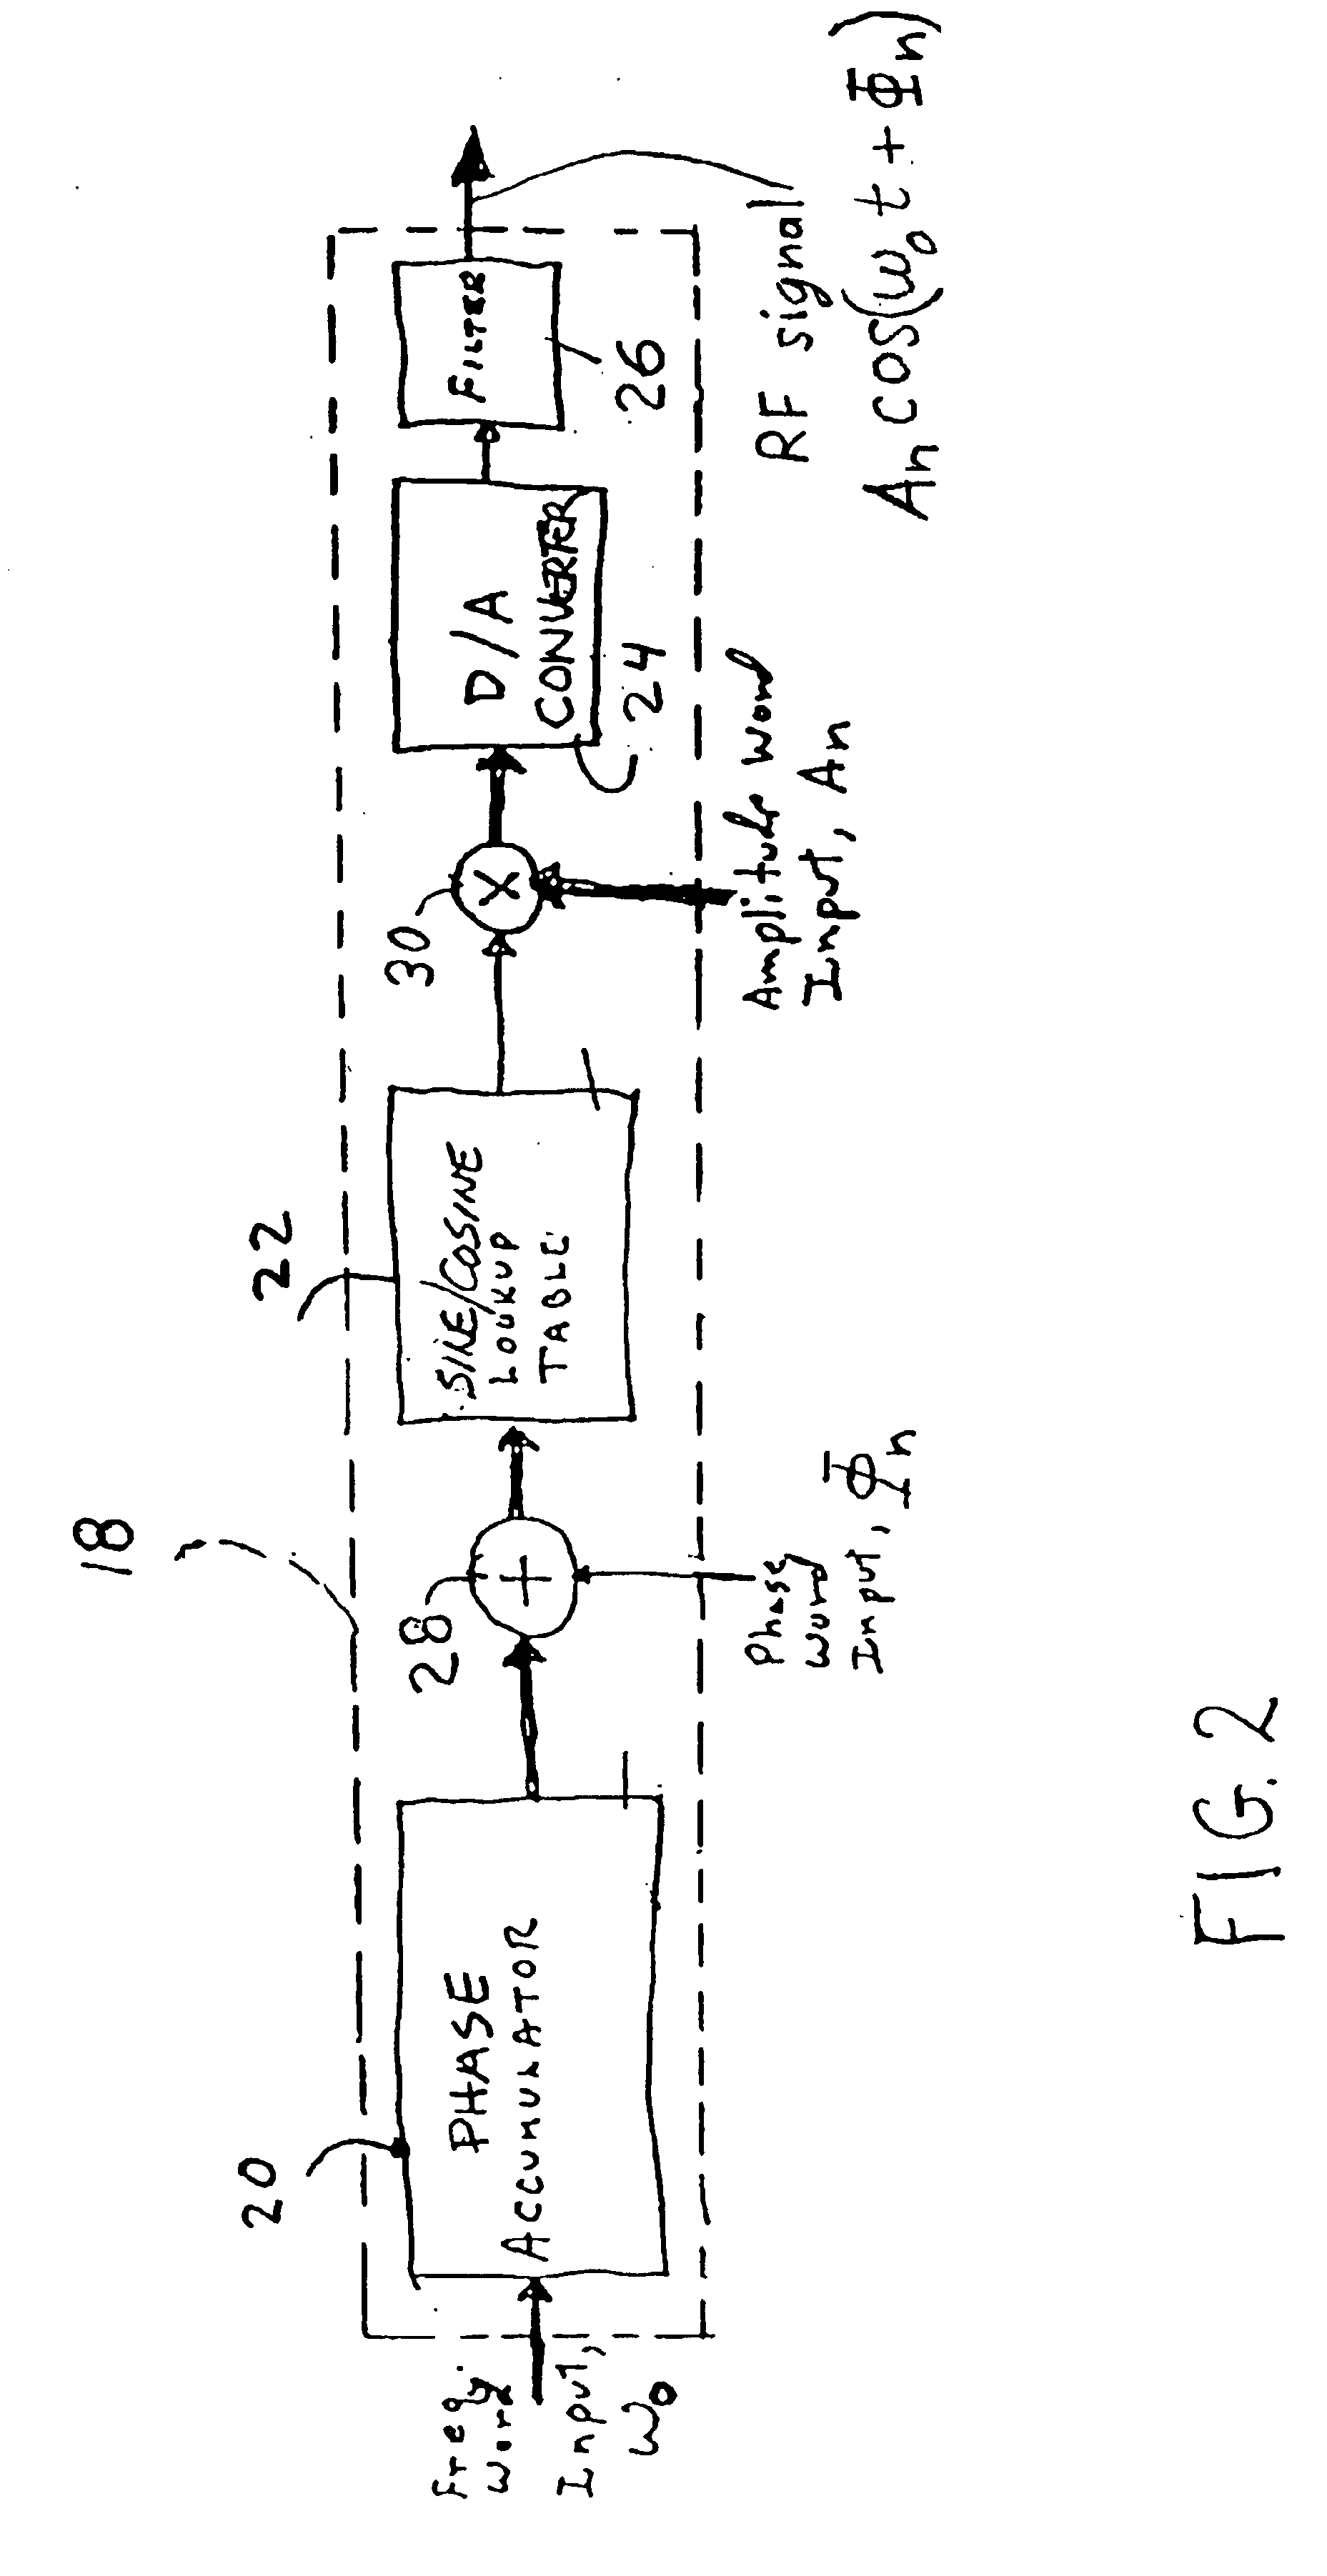 Apparatus for and method of forming multiple simultaneous electronically scanned beams using direct digital synthesis